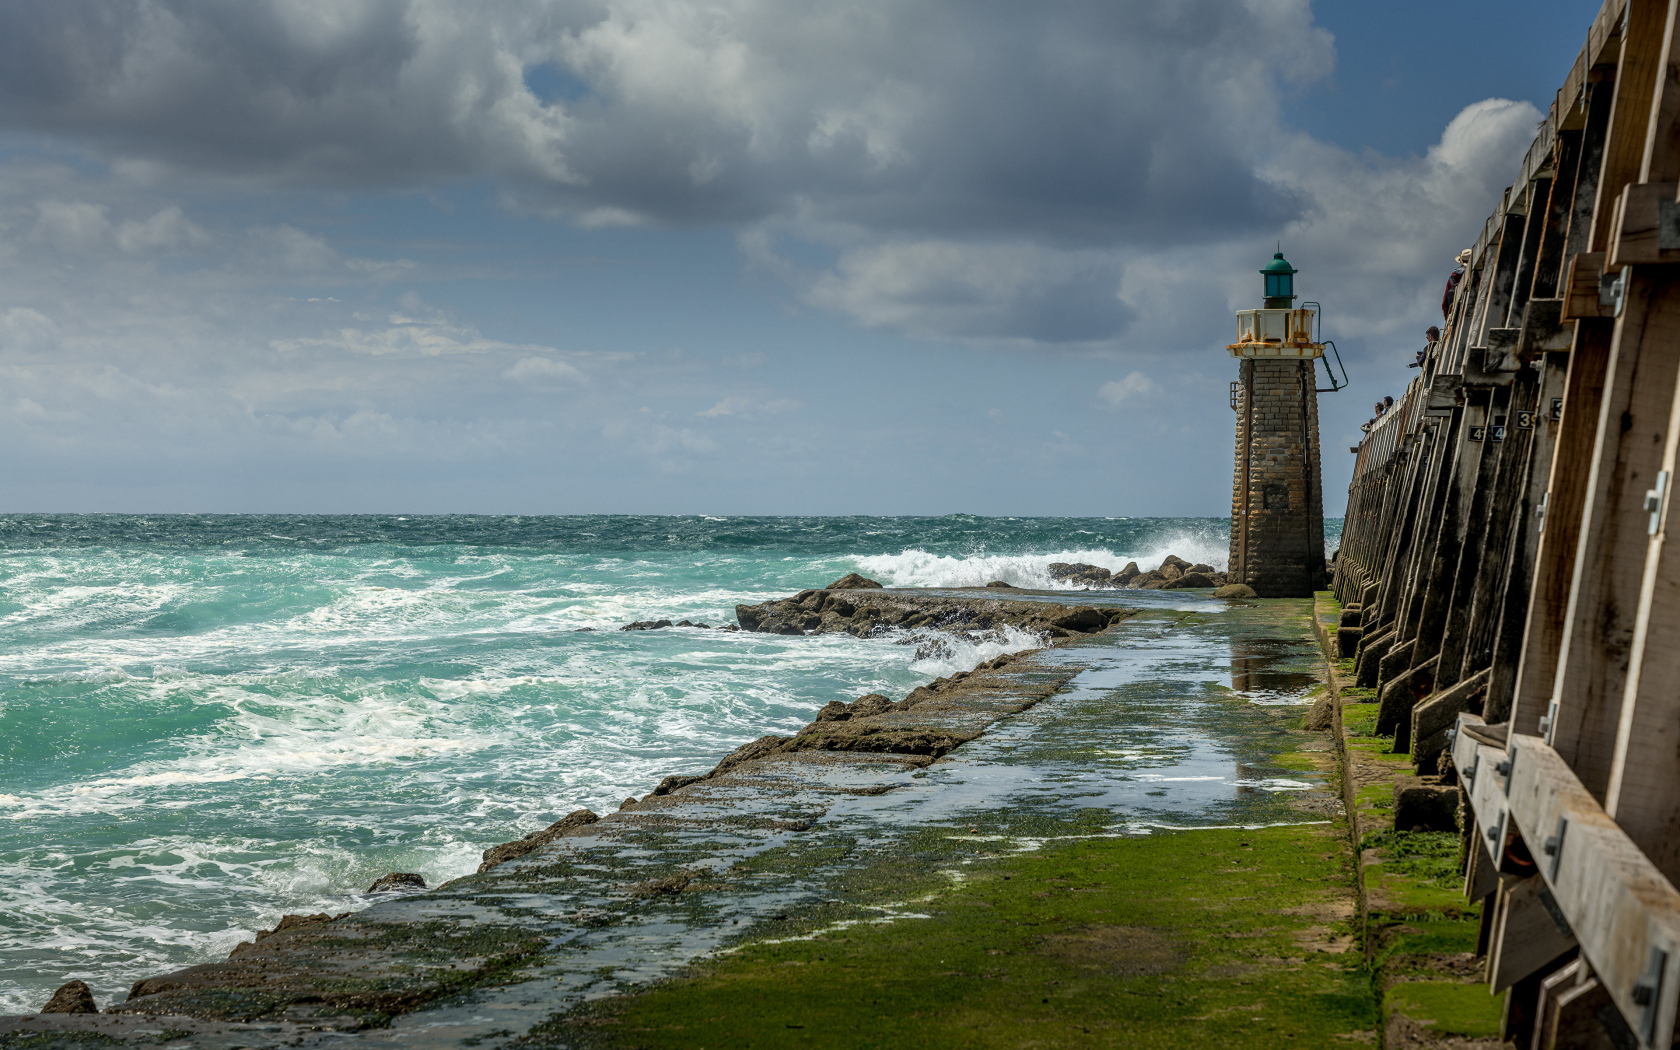 Lighthouse on the shore of the raging sea